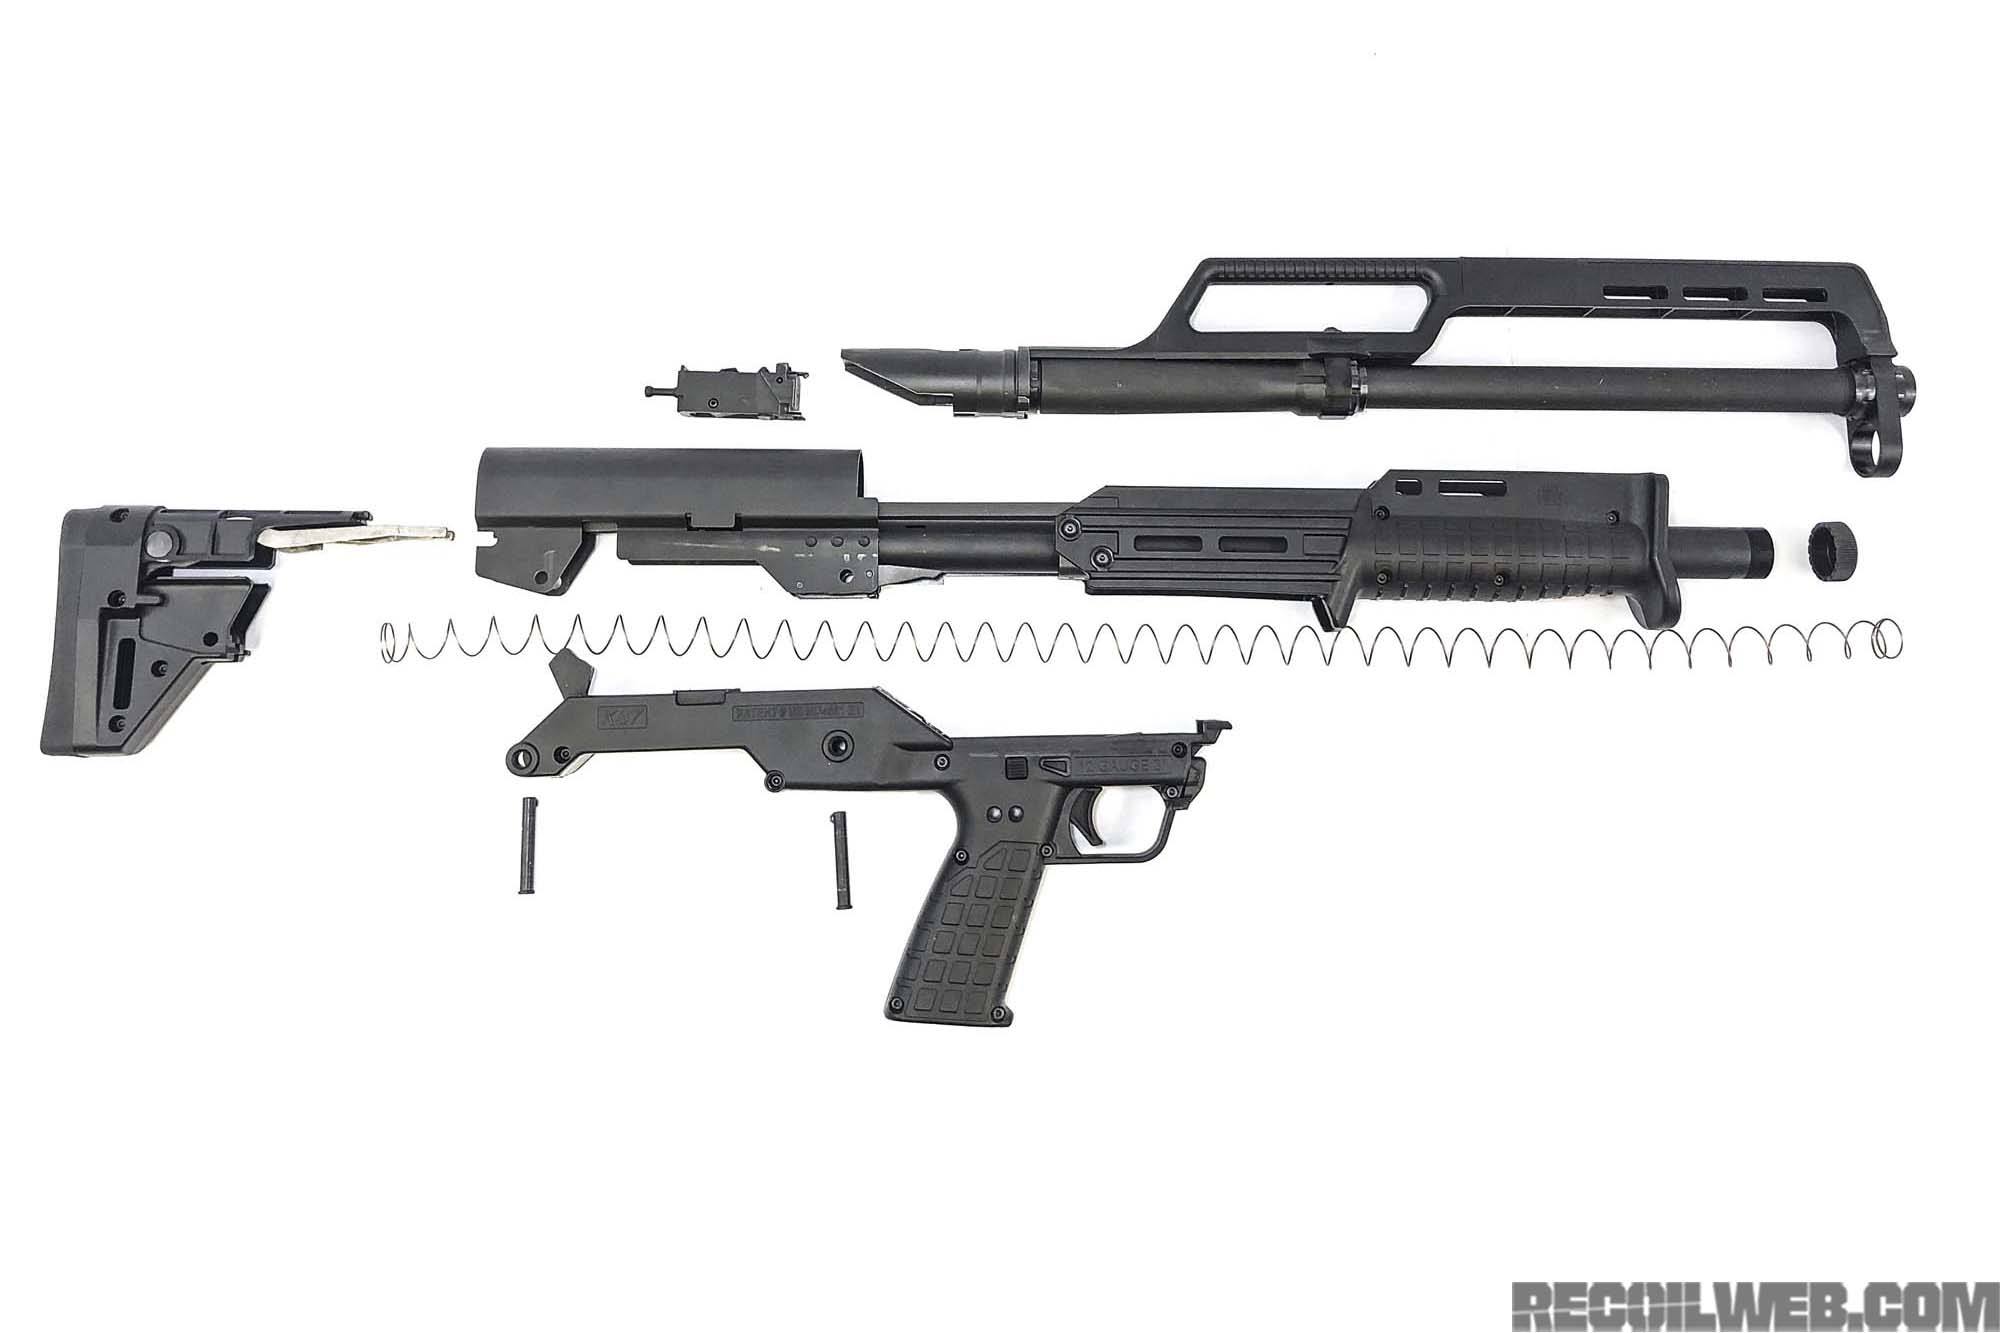 When KelTec’s KSG shotgun first came out in 2011, most of the hype around i...